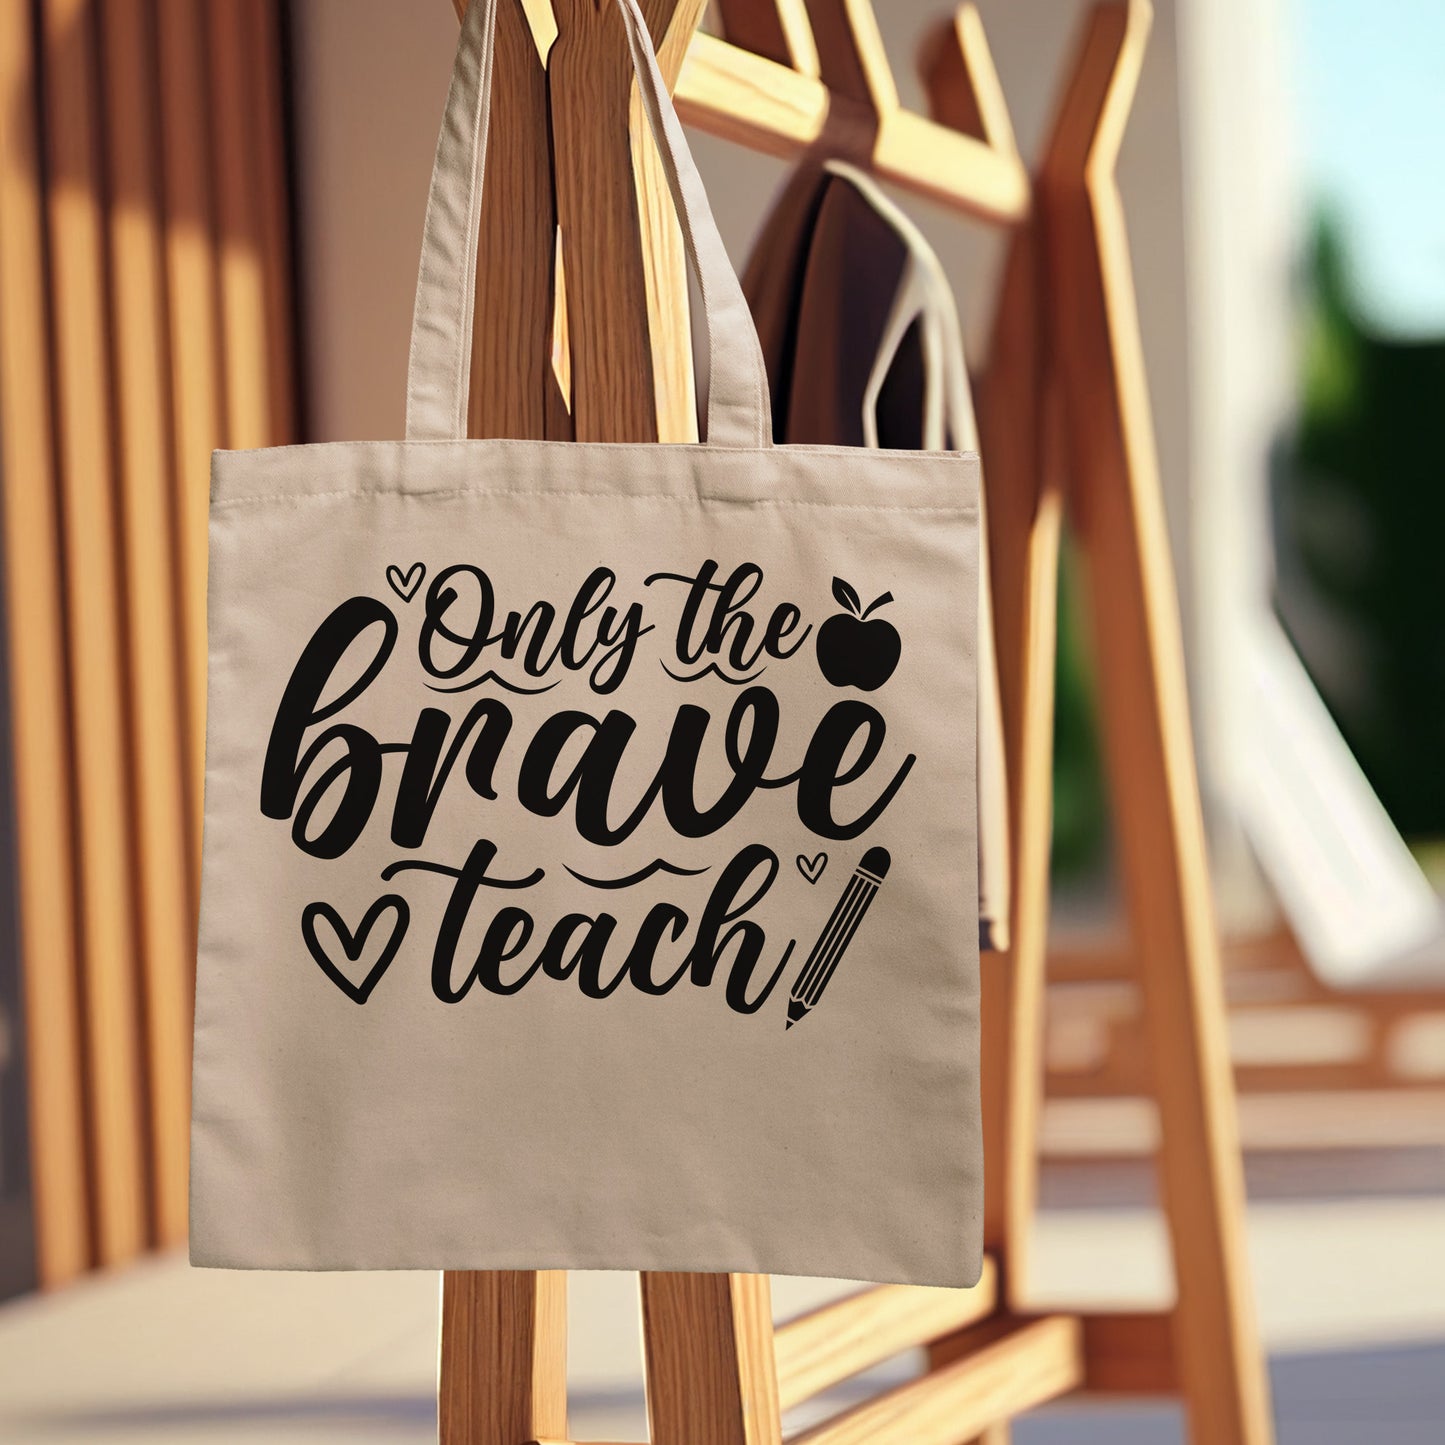 "Only The Brave Teach" Graphic